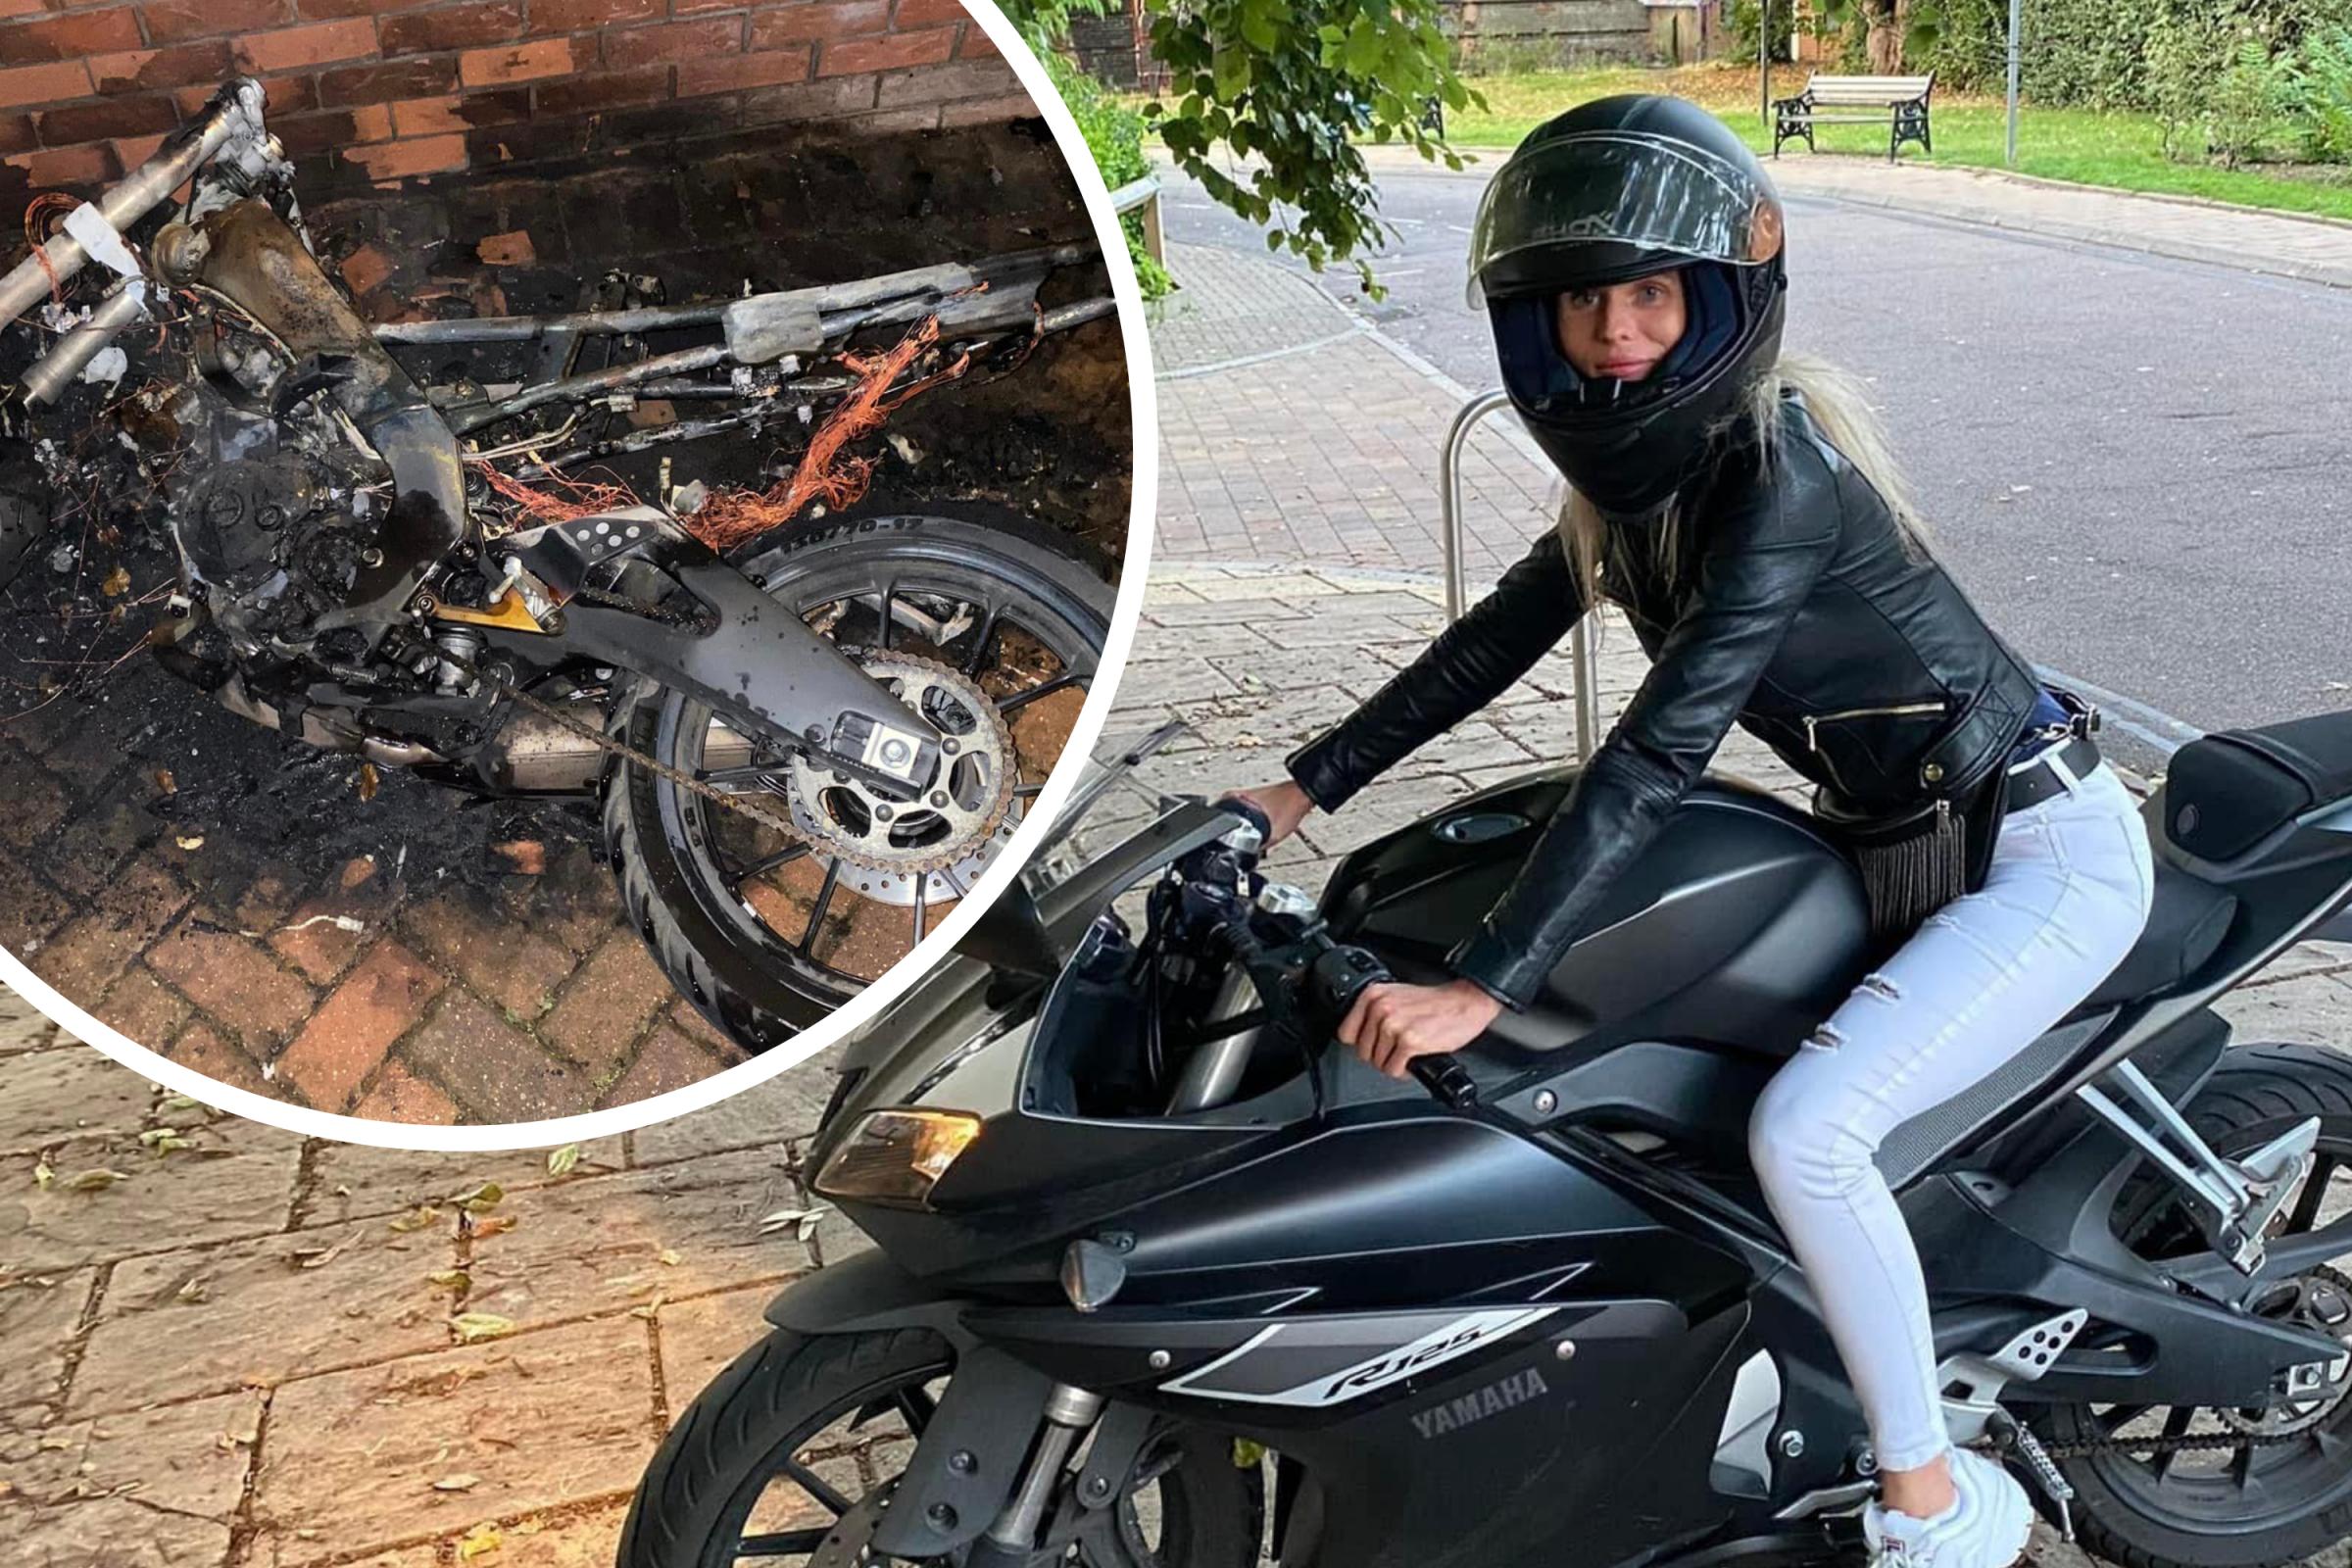 Colchester motorcyclist's £4k bike stolen and torched